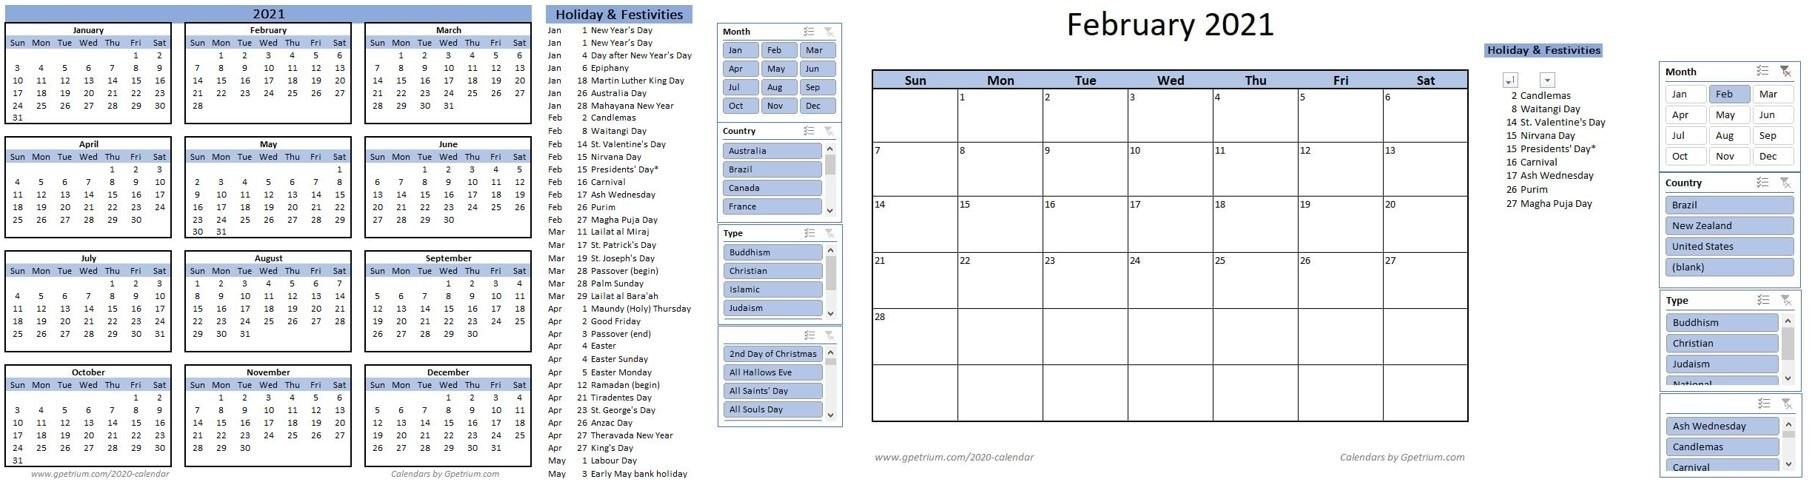 Free 2021 Calendar Template In Excel – Gpetrium-List Of Holidays 2021 Excel